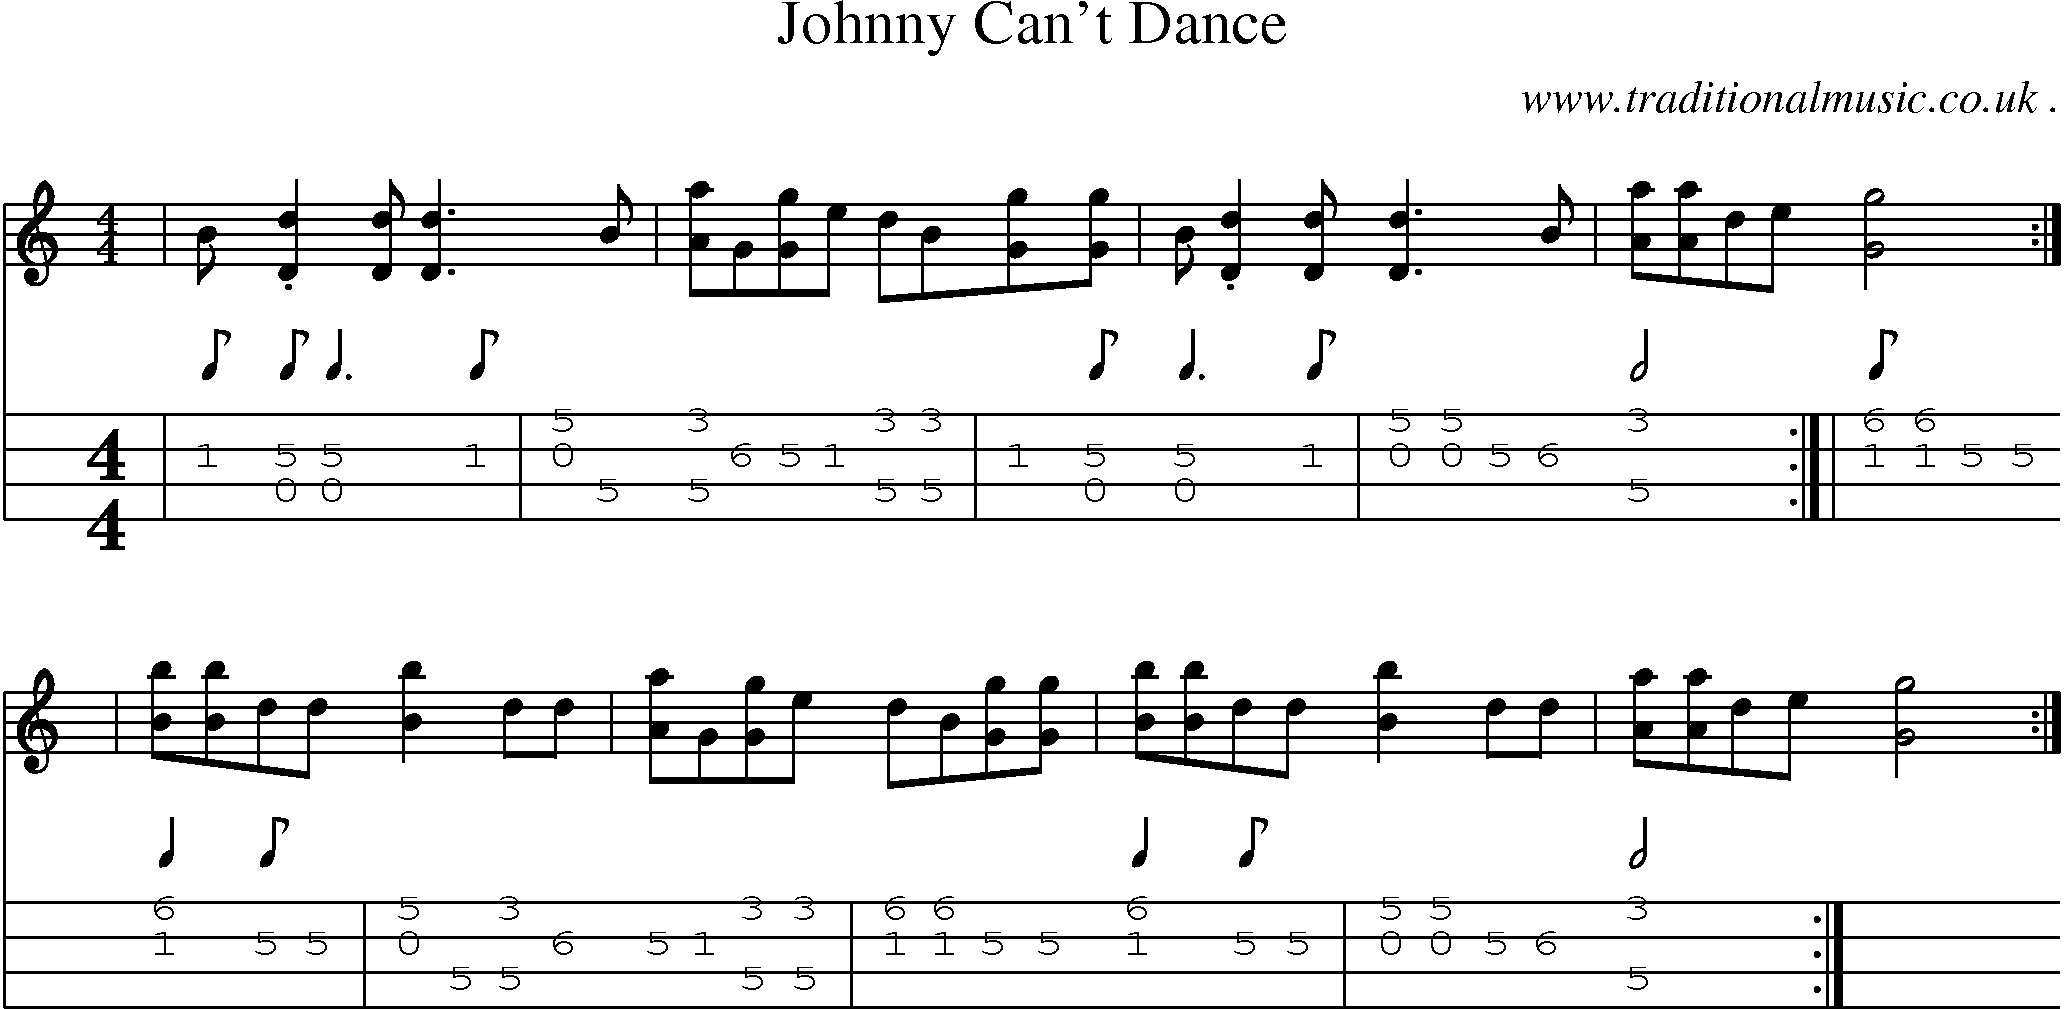 Music Score and Mandolin Tabs for Johnny Cant Dance